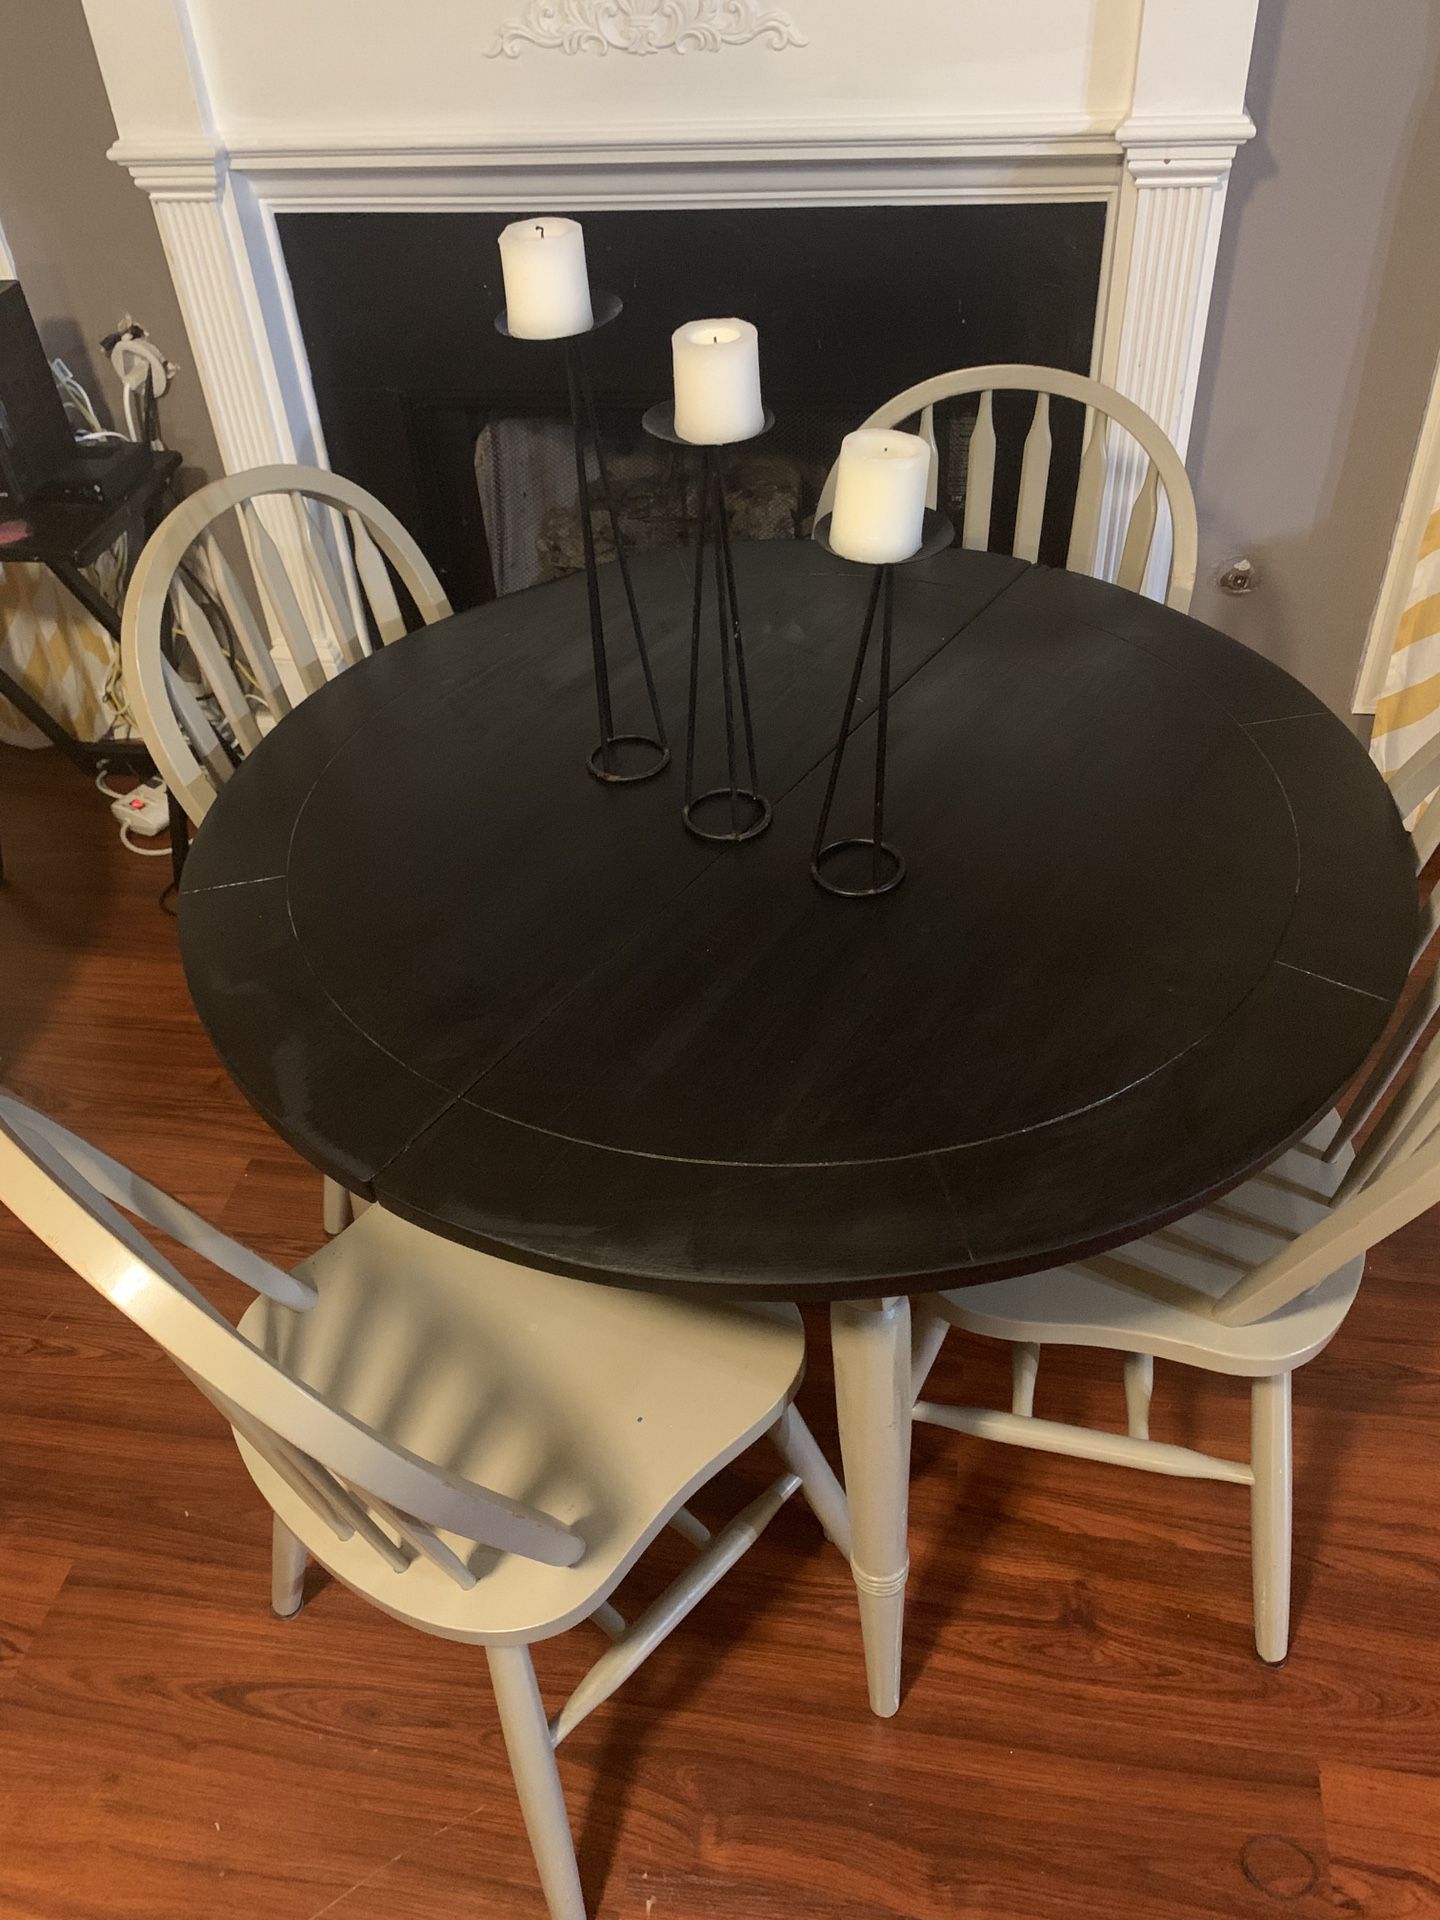 Farm house table and chairs